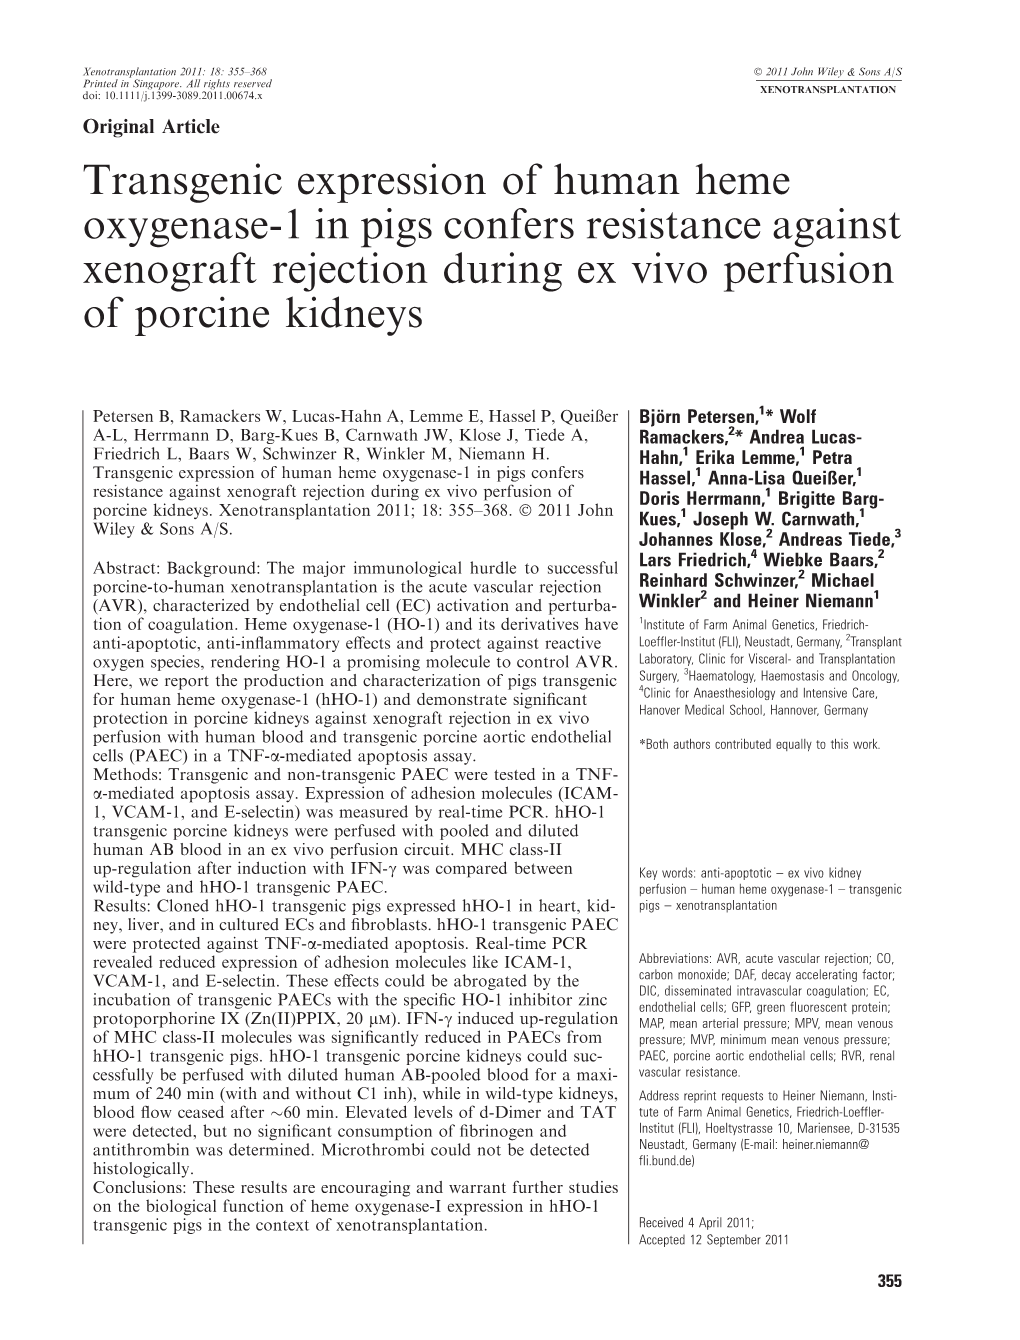 Transgenic Expression of Human Heme Oxygenase1 in Pigs Confers